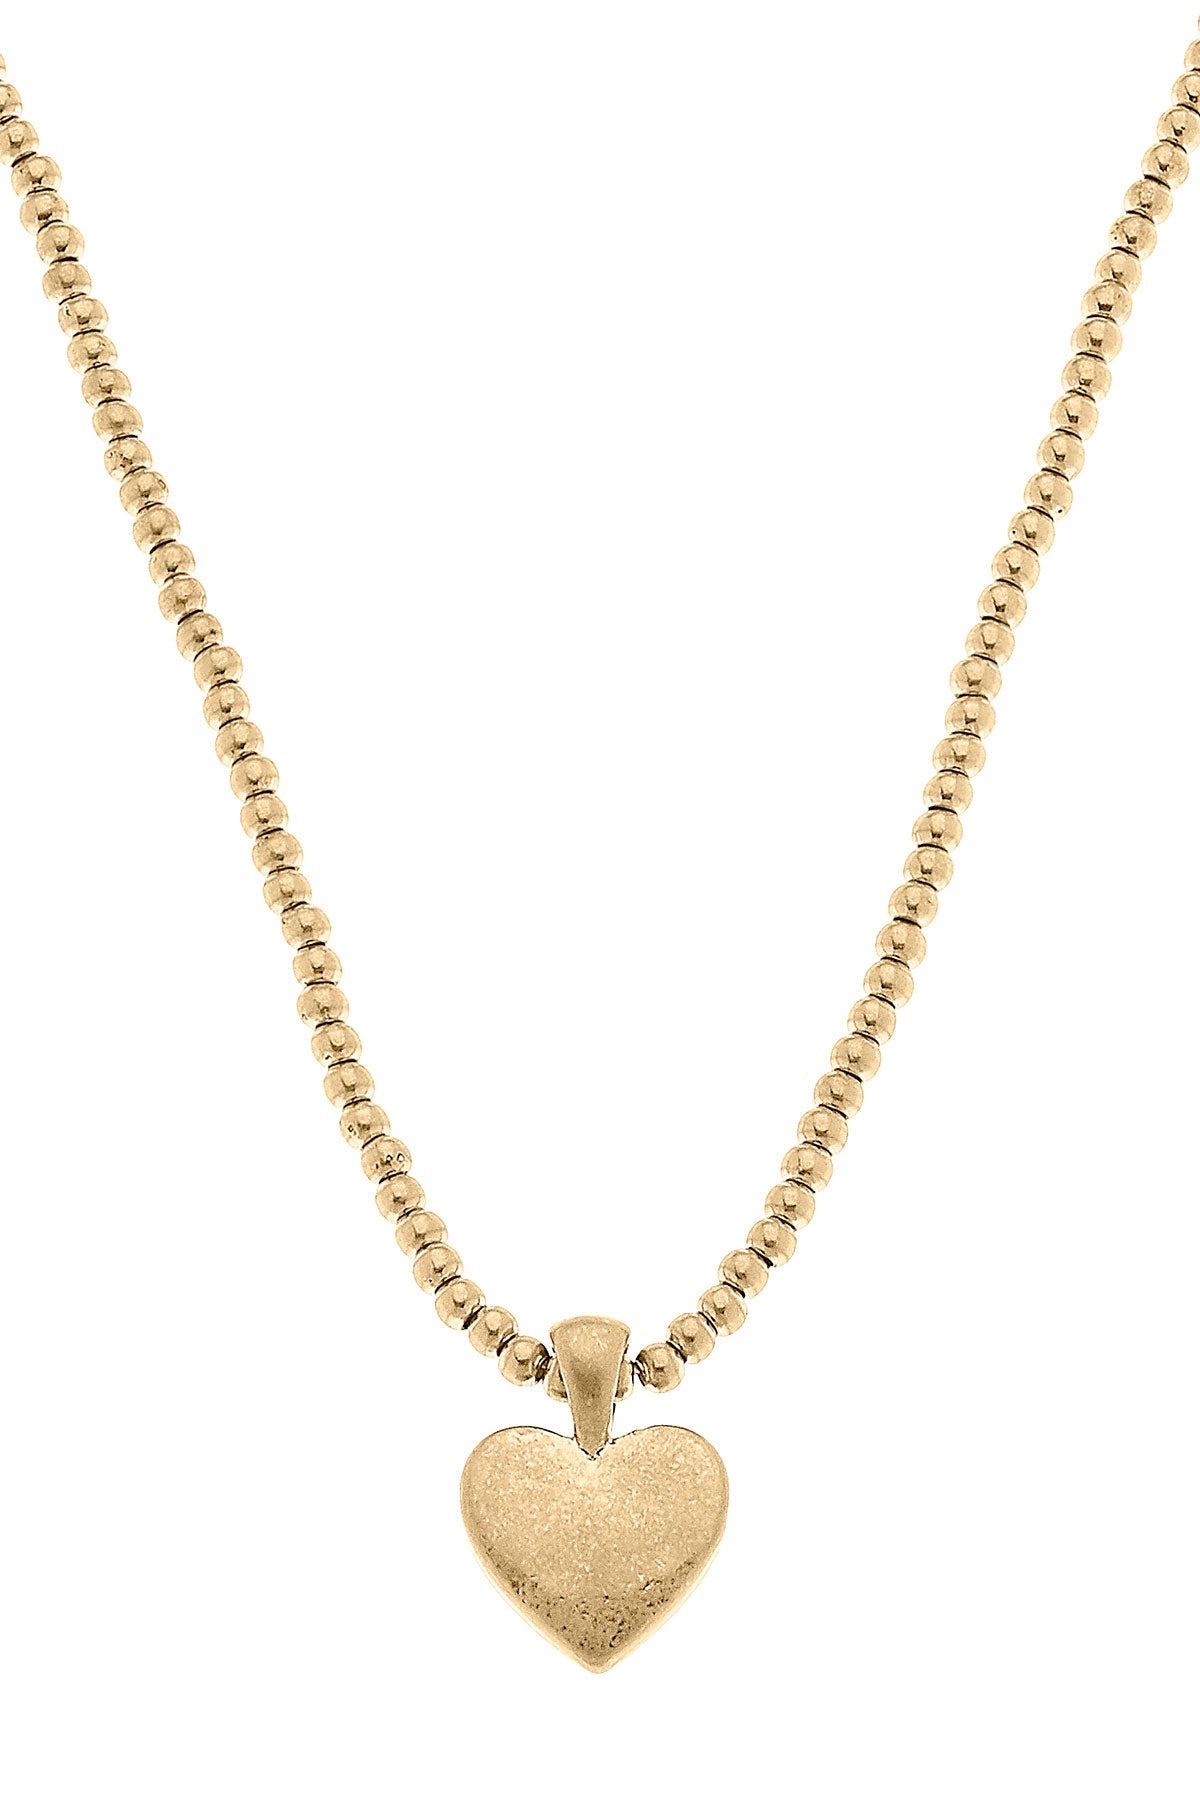 Macy Heart Pendant with Ball Bead Chain Necklace in Worn Gold